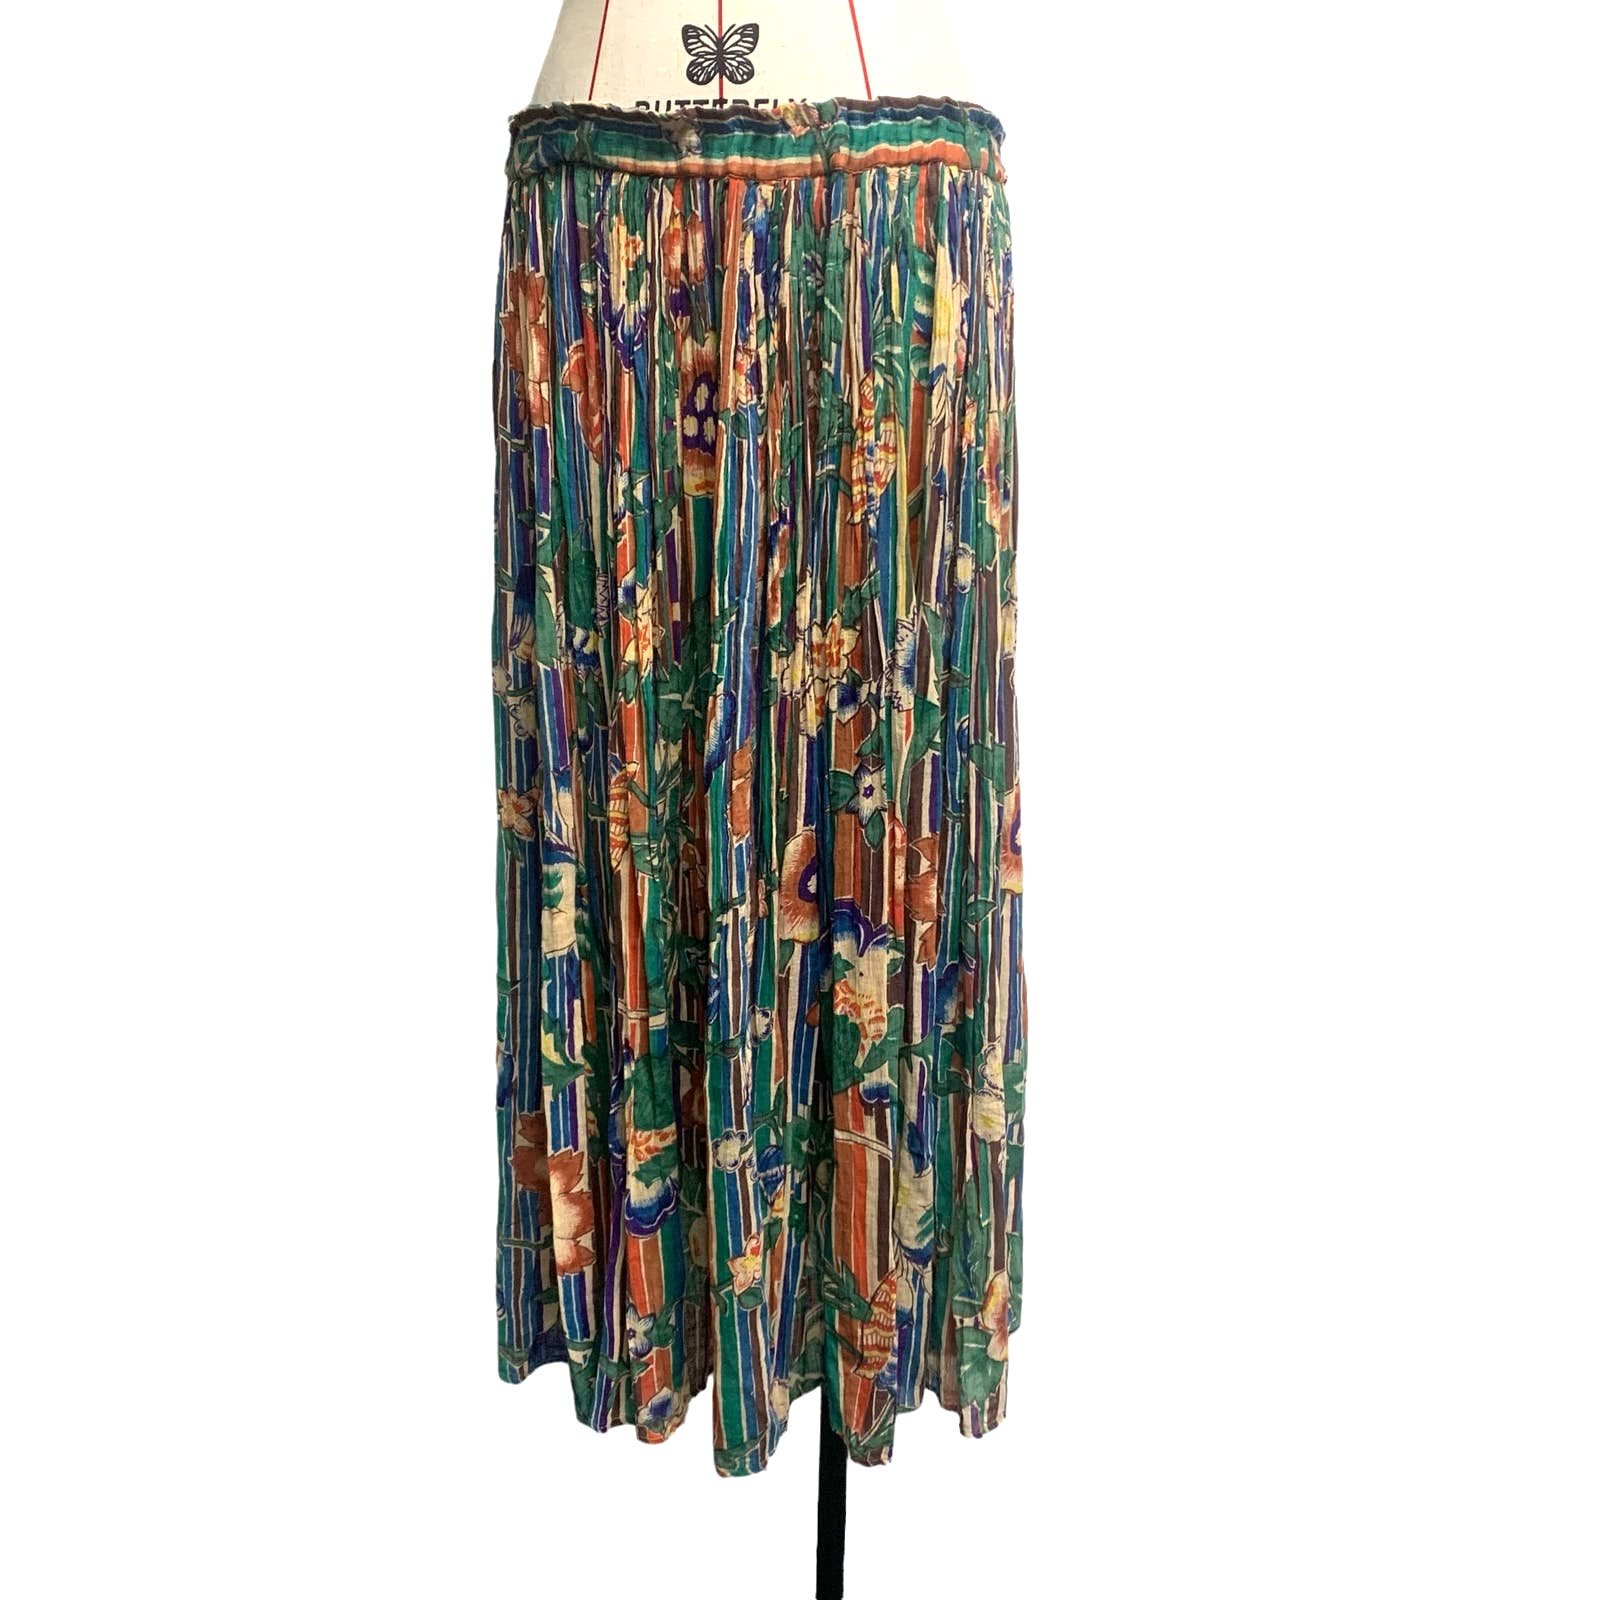 large discount Vintage Bila Womens Size M Colorful Printed Pleated Skirt fFNRcTk5r online store